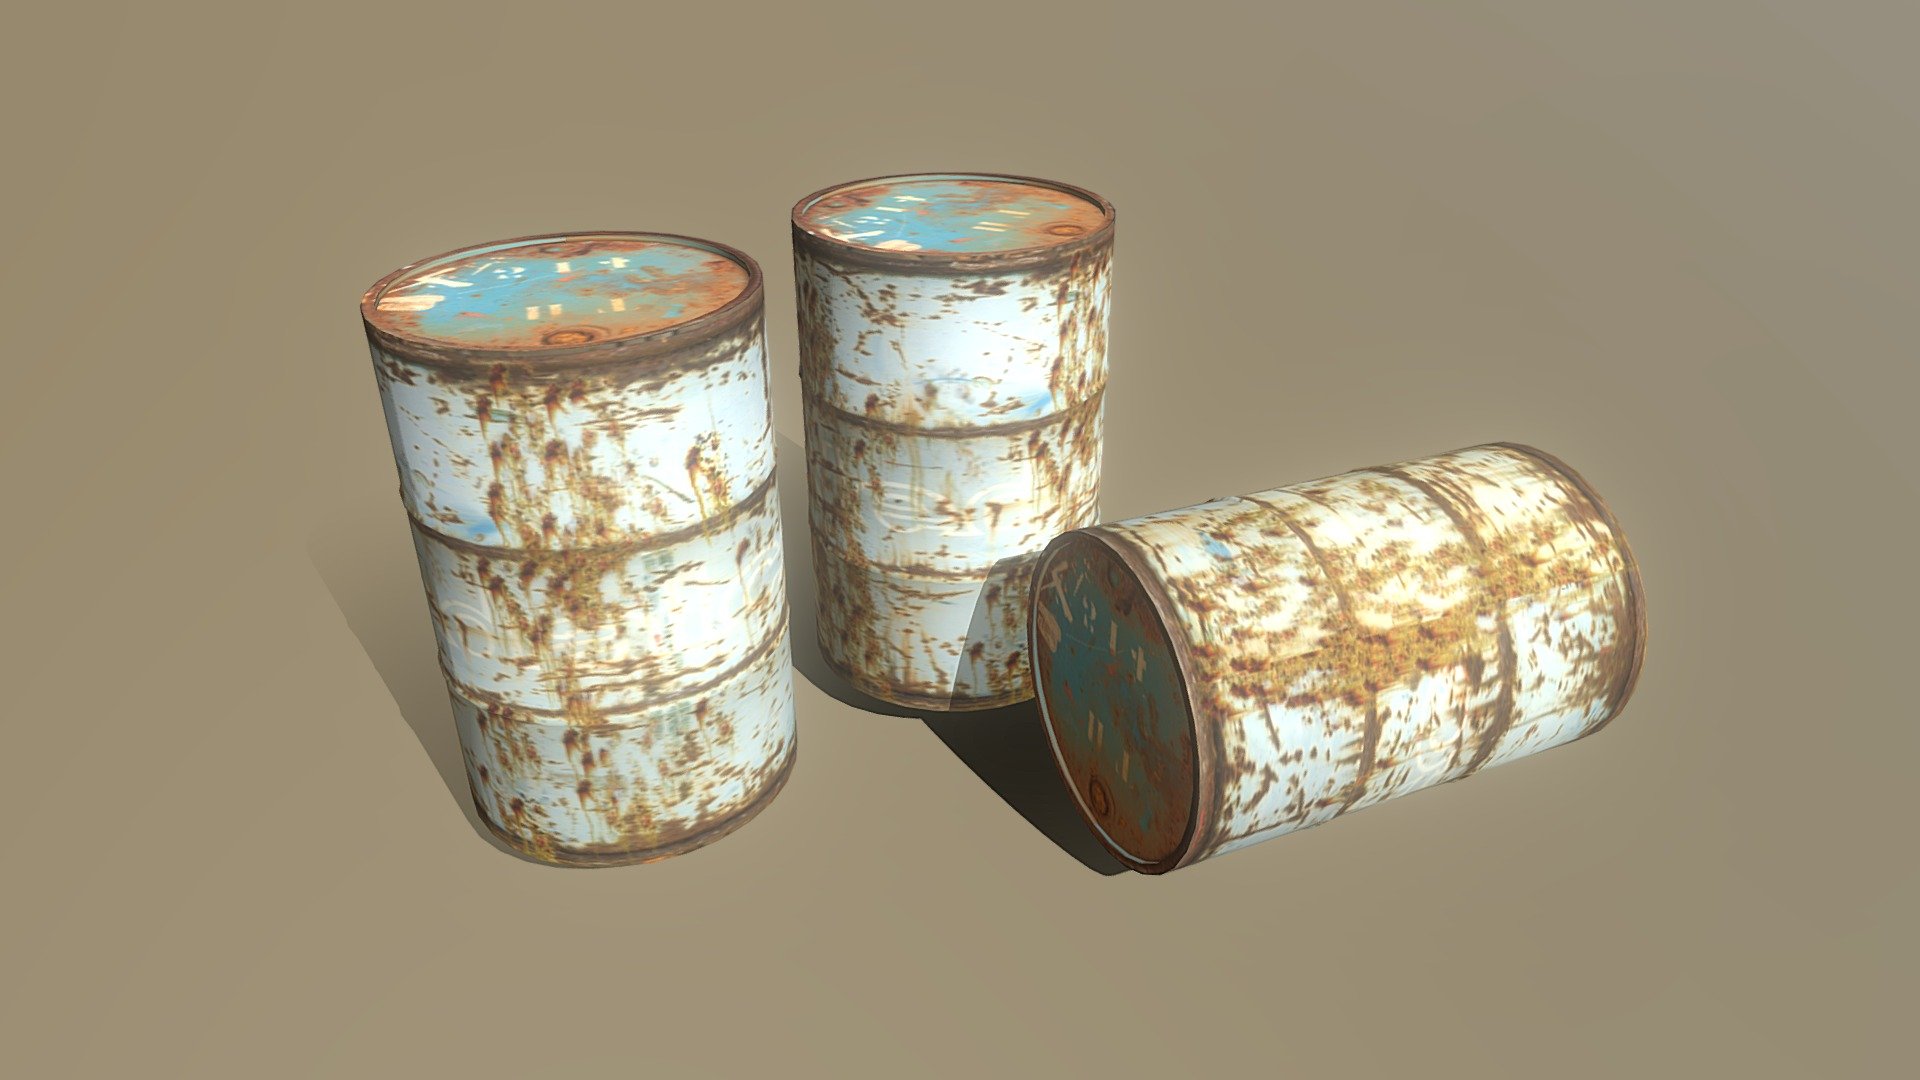 Oil barrel with textured,Game assets
Can be used as game assets or props or any required place.
Hope you like it!
Please Follow me and leave comments.
Email: imdan1995@gmail.com 
Instagram id: @3danielart 
Facebook : Daniel Naidu - Oil barrel Textured Game assets - Download Free 3D model by Dinesh Naidu (@Dinesh_TS) 3d model